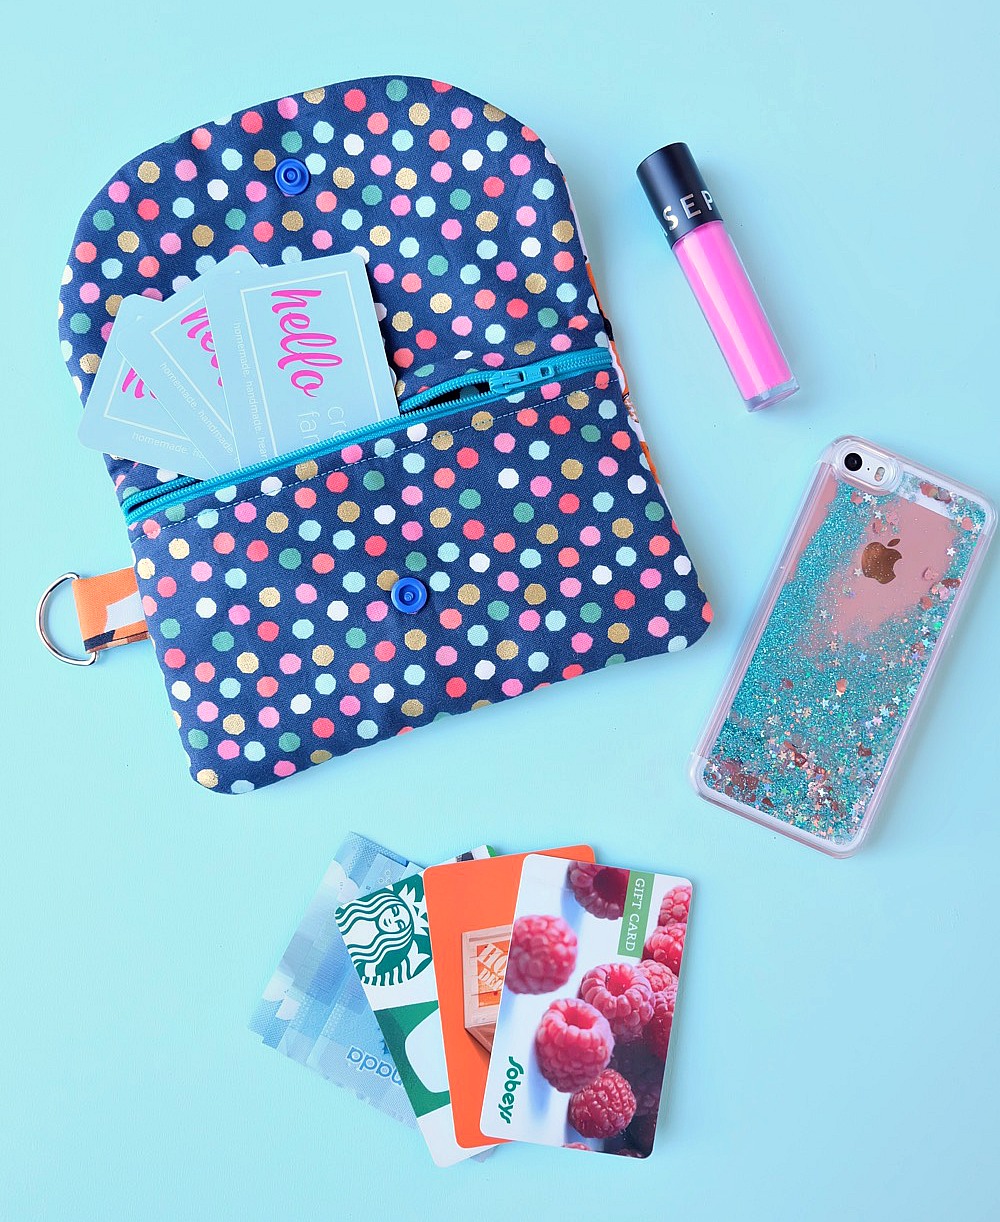 Looking for a cute little clutch to carry all your essentials? Check out this Essential Wallet Sewing Tutorial made using the Cricut Maker! This sweet little bag would make an adorable handmade gift! Perfect for teens and tweens. This project is #sponsored by Cricut. 